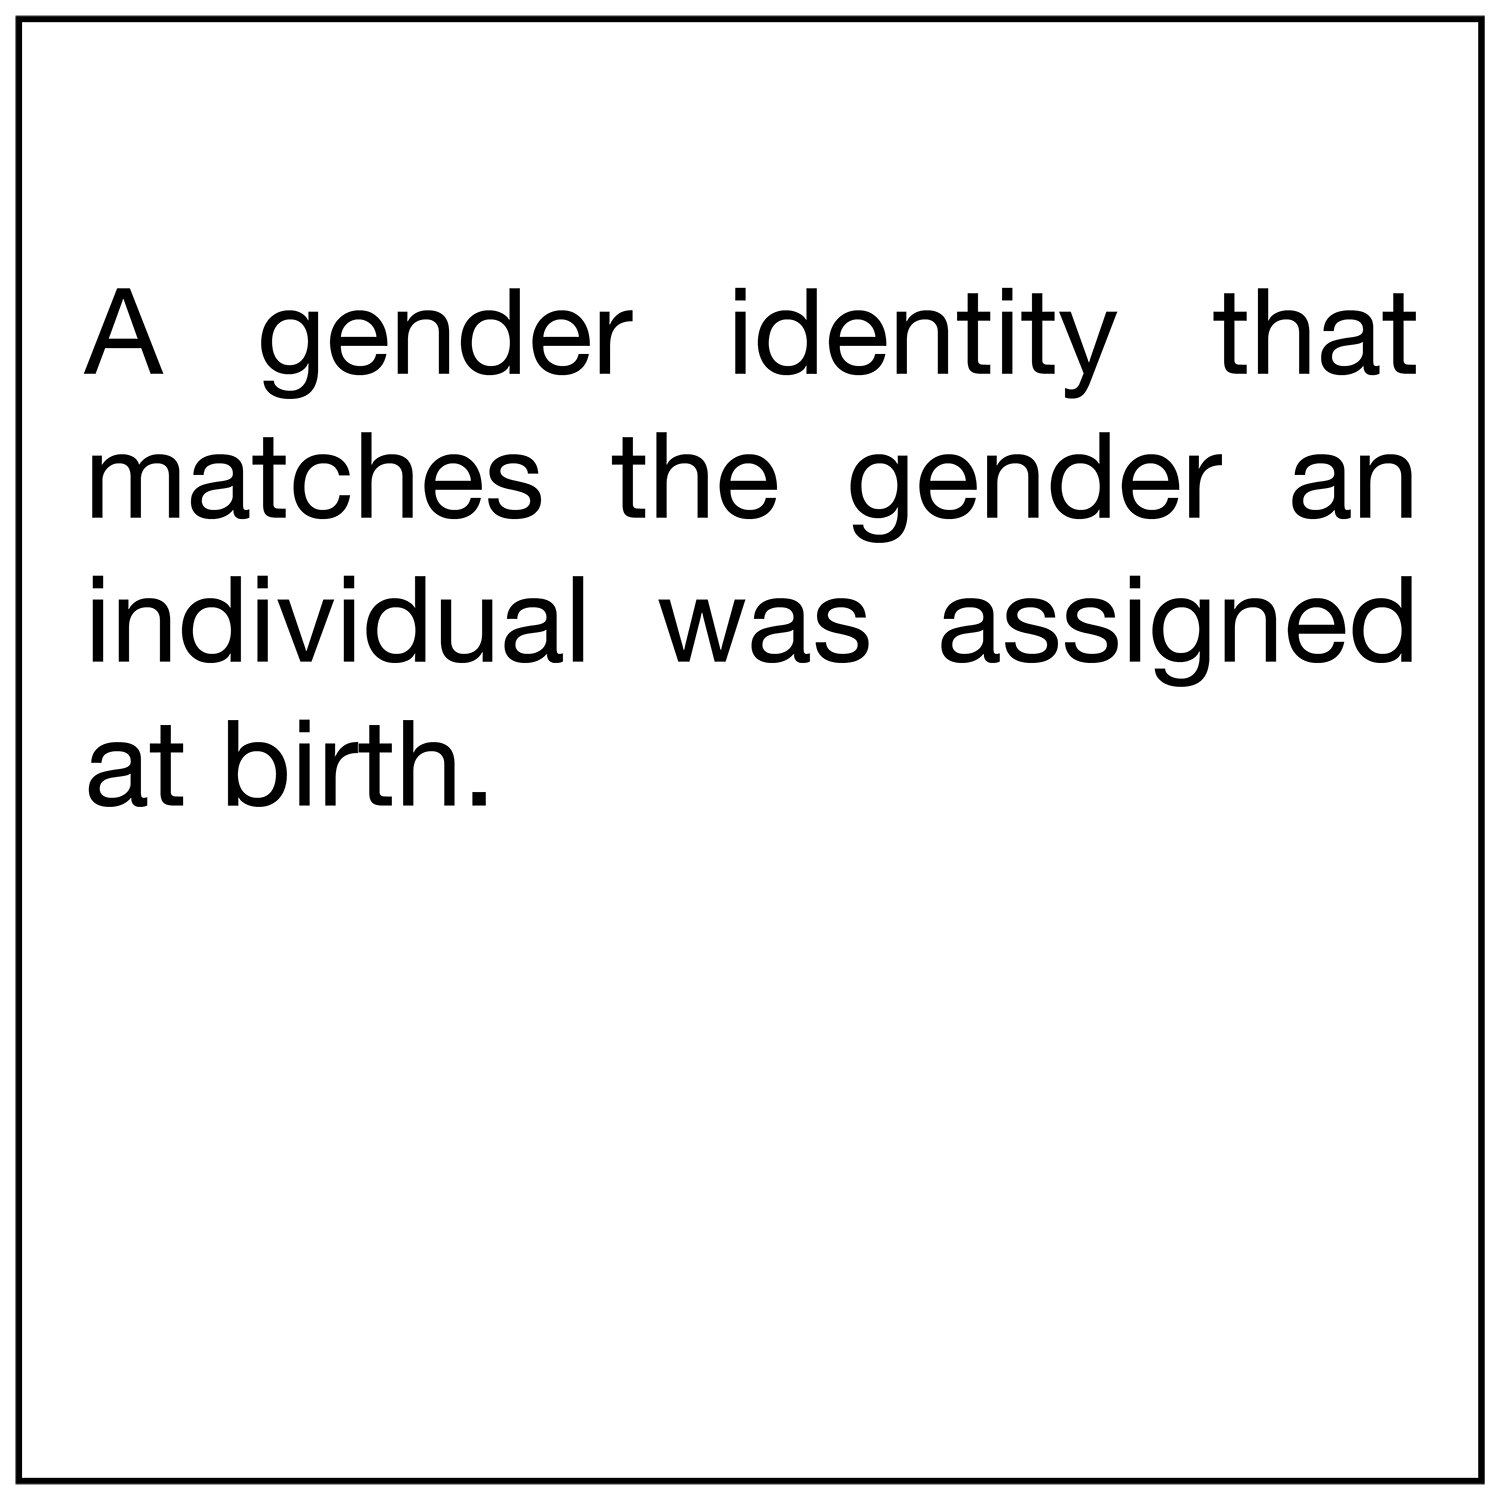  A gender identity that matches the gender an individual was assigned at birth. 